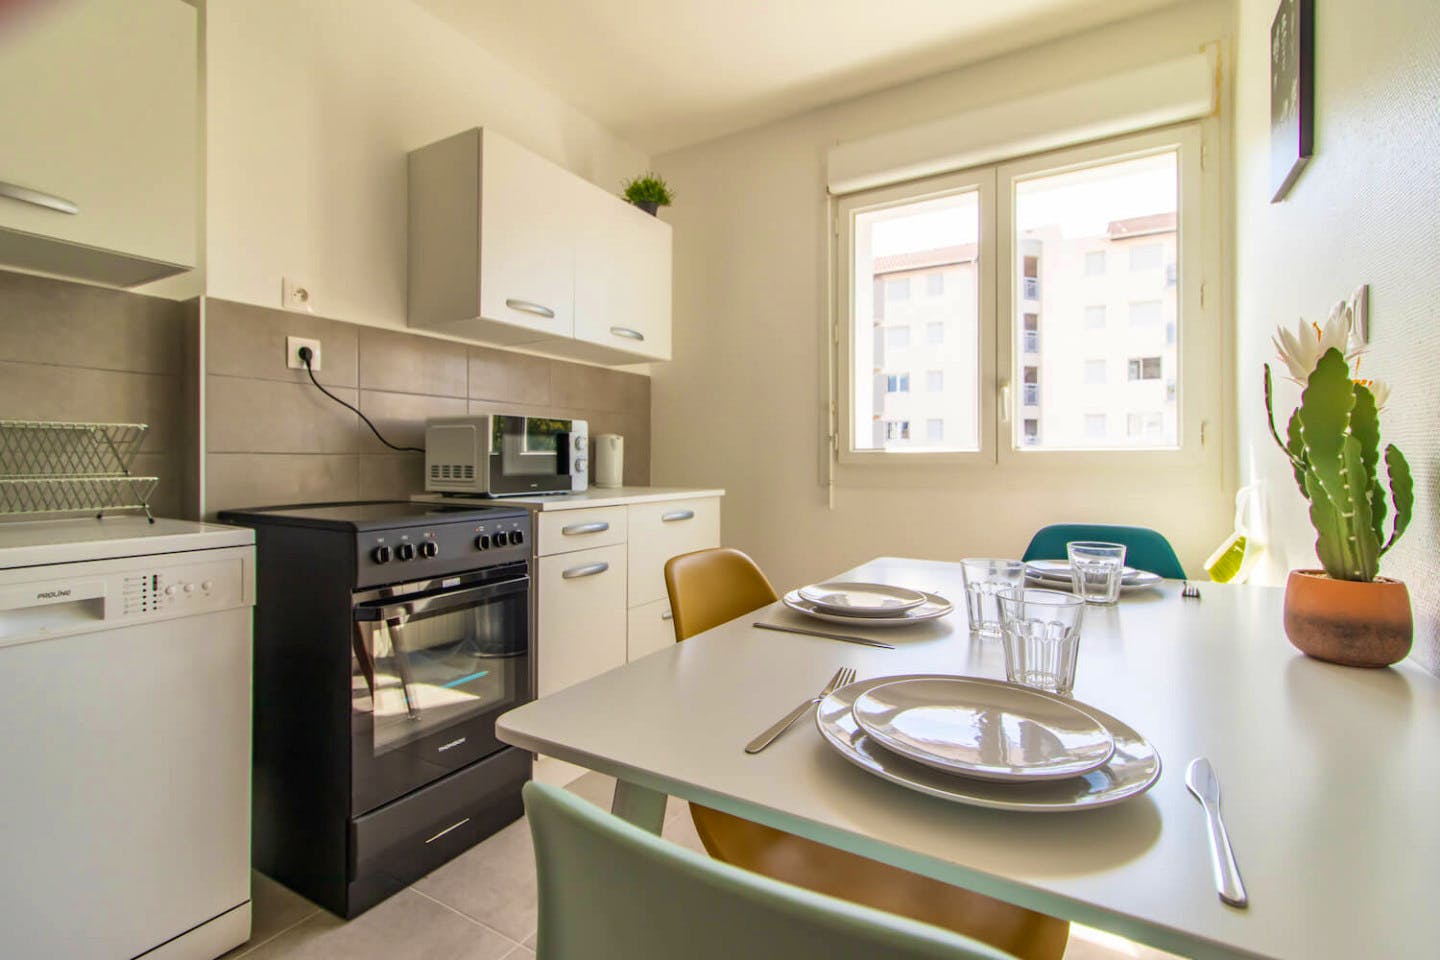 Apartment located in the city center of Grenoble